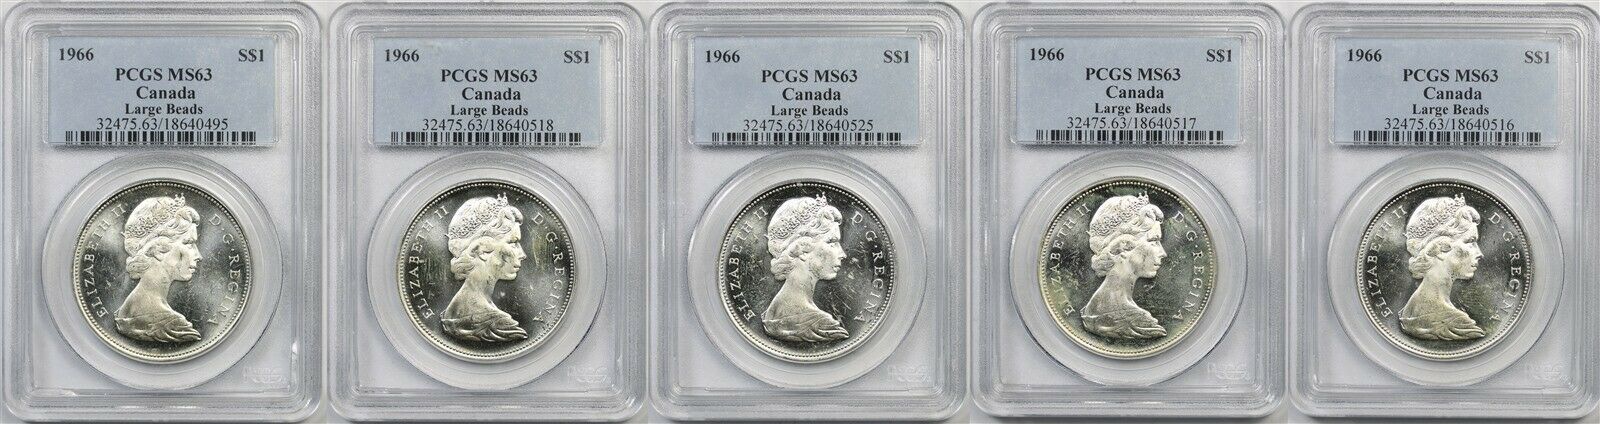 Lot 5- 1966 $1 PCGS MS 63 (Large Beads) Canada Silver Dollar